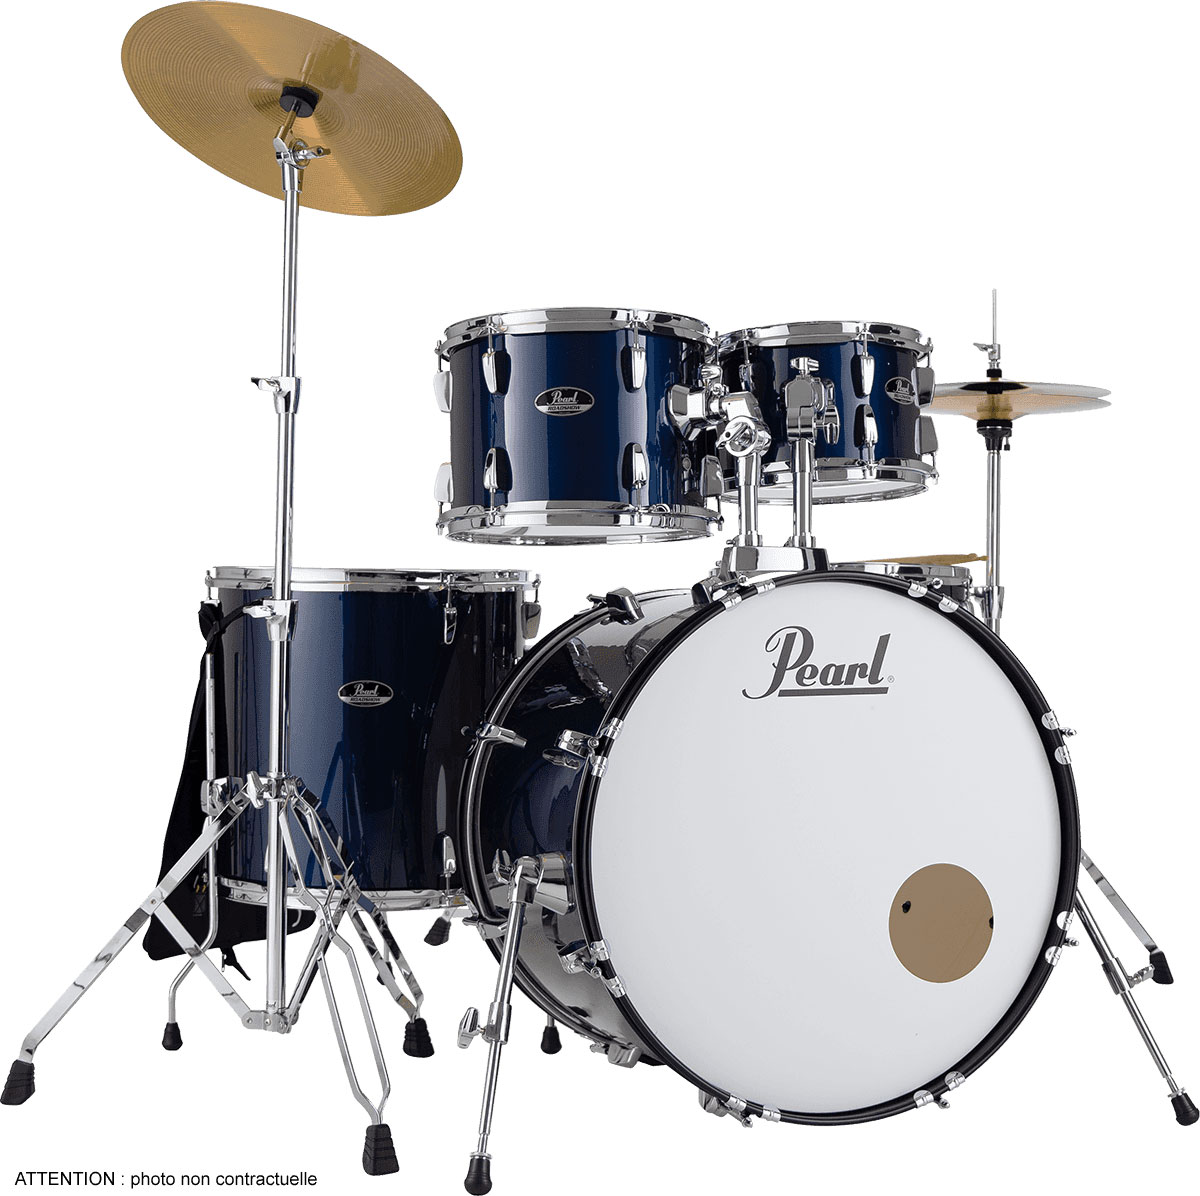 PEARL DRUMS ROADSHOW STAGE 22 + PACK SOLAR ROYAL BLUE METALLIC